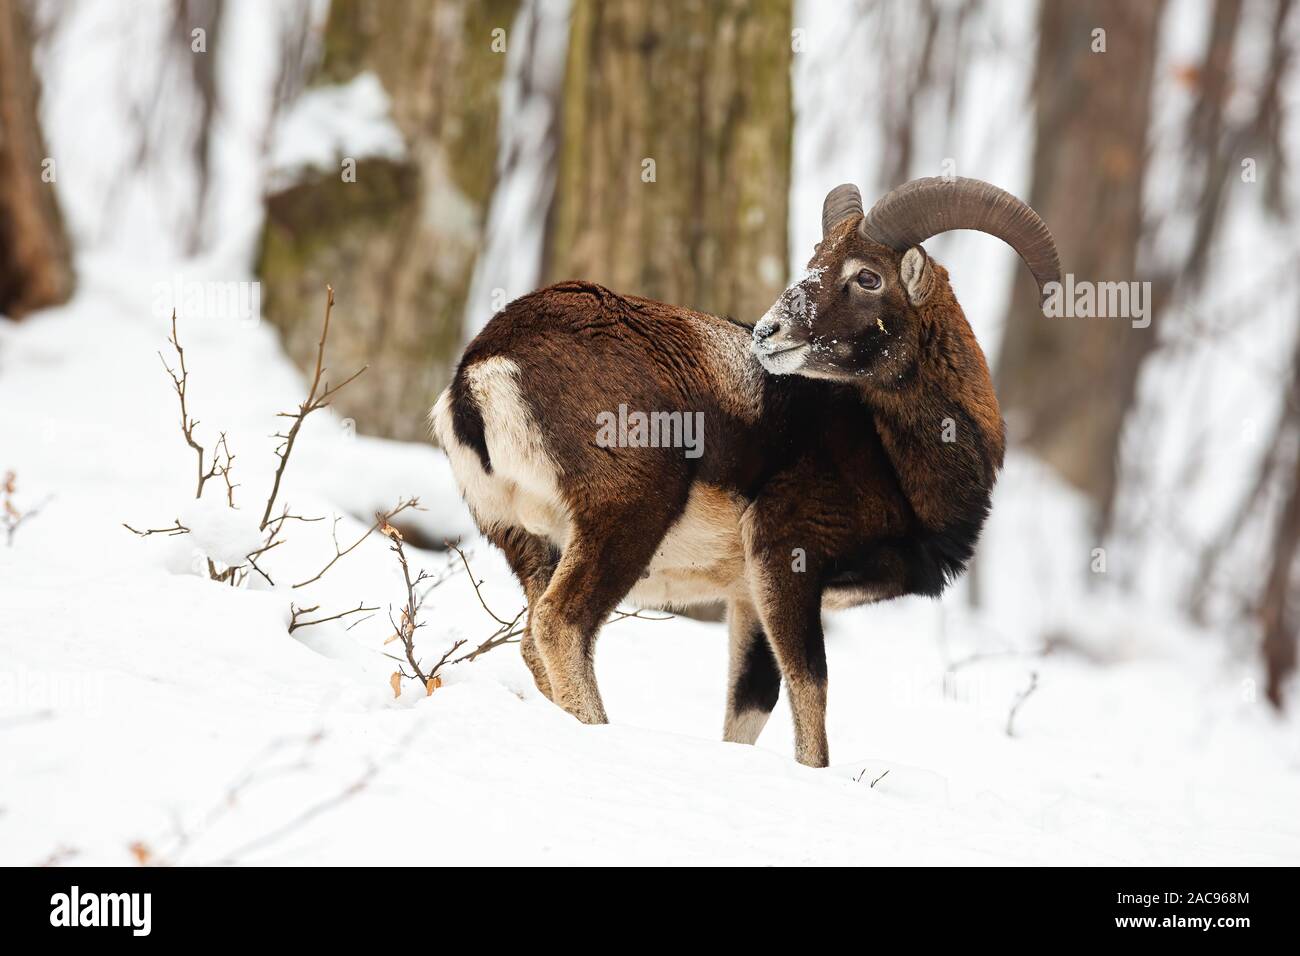 Male mouflon, ovis musimon, standing in winter forest with snow Stock Photo